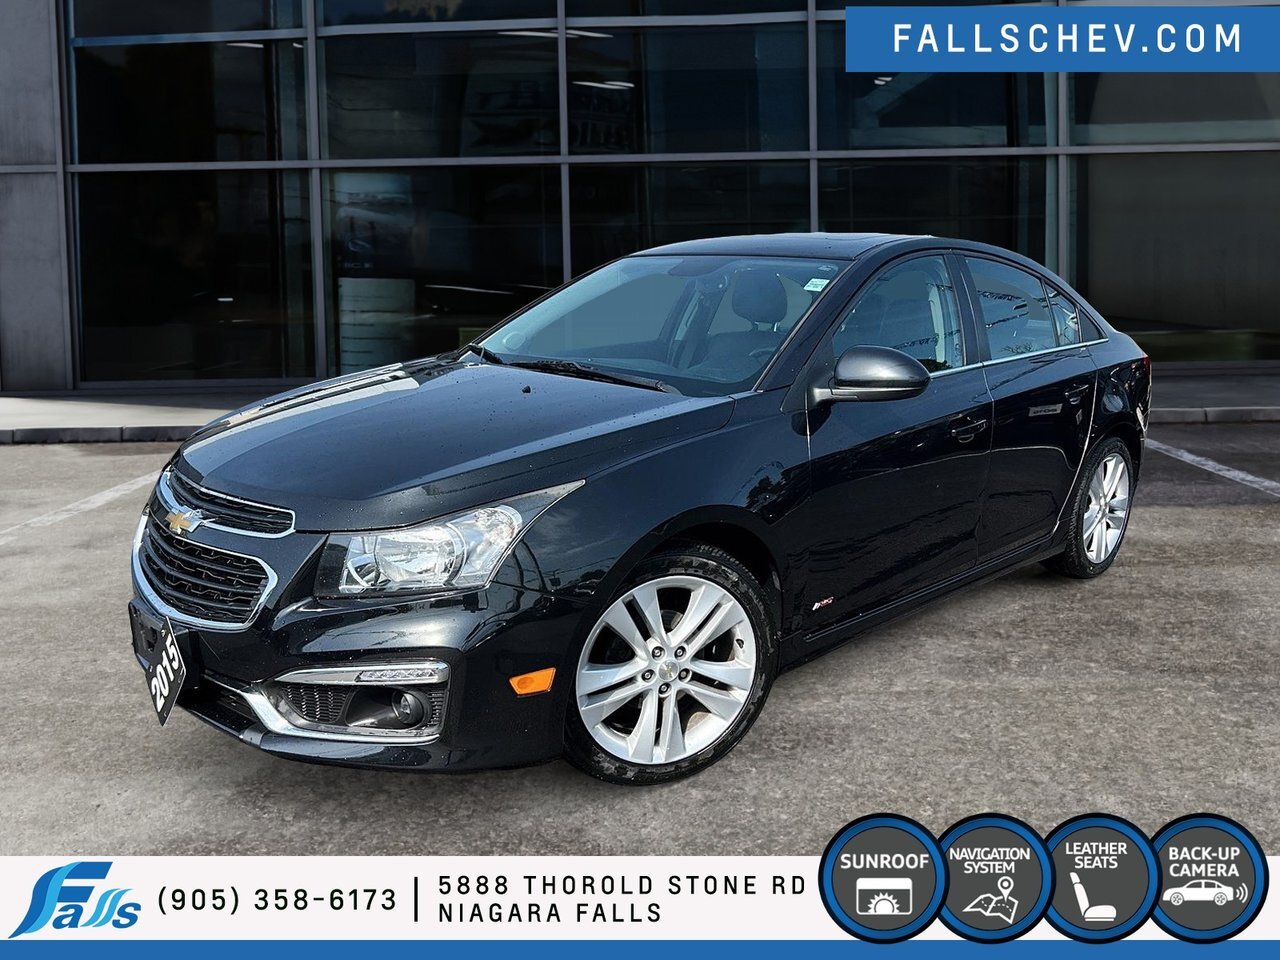 2015 Chevrolet Cruze 2LT **VEHICLE BEING SOLD AS IS**